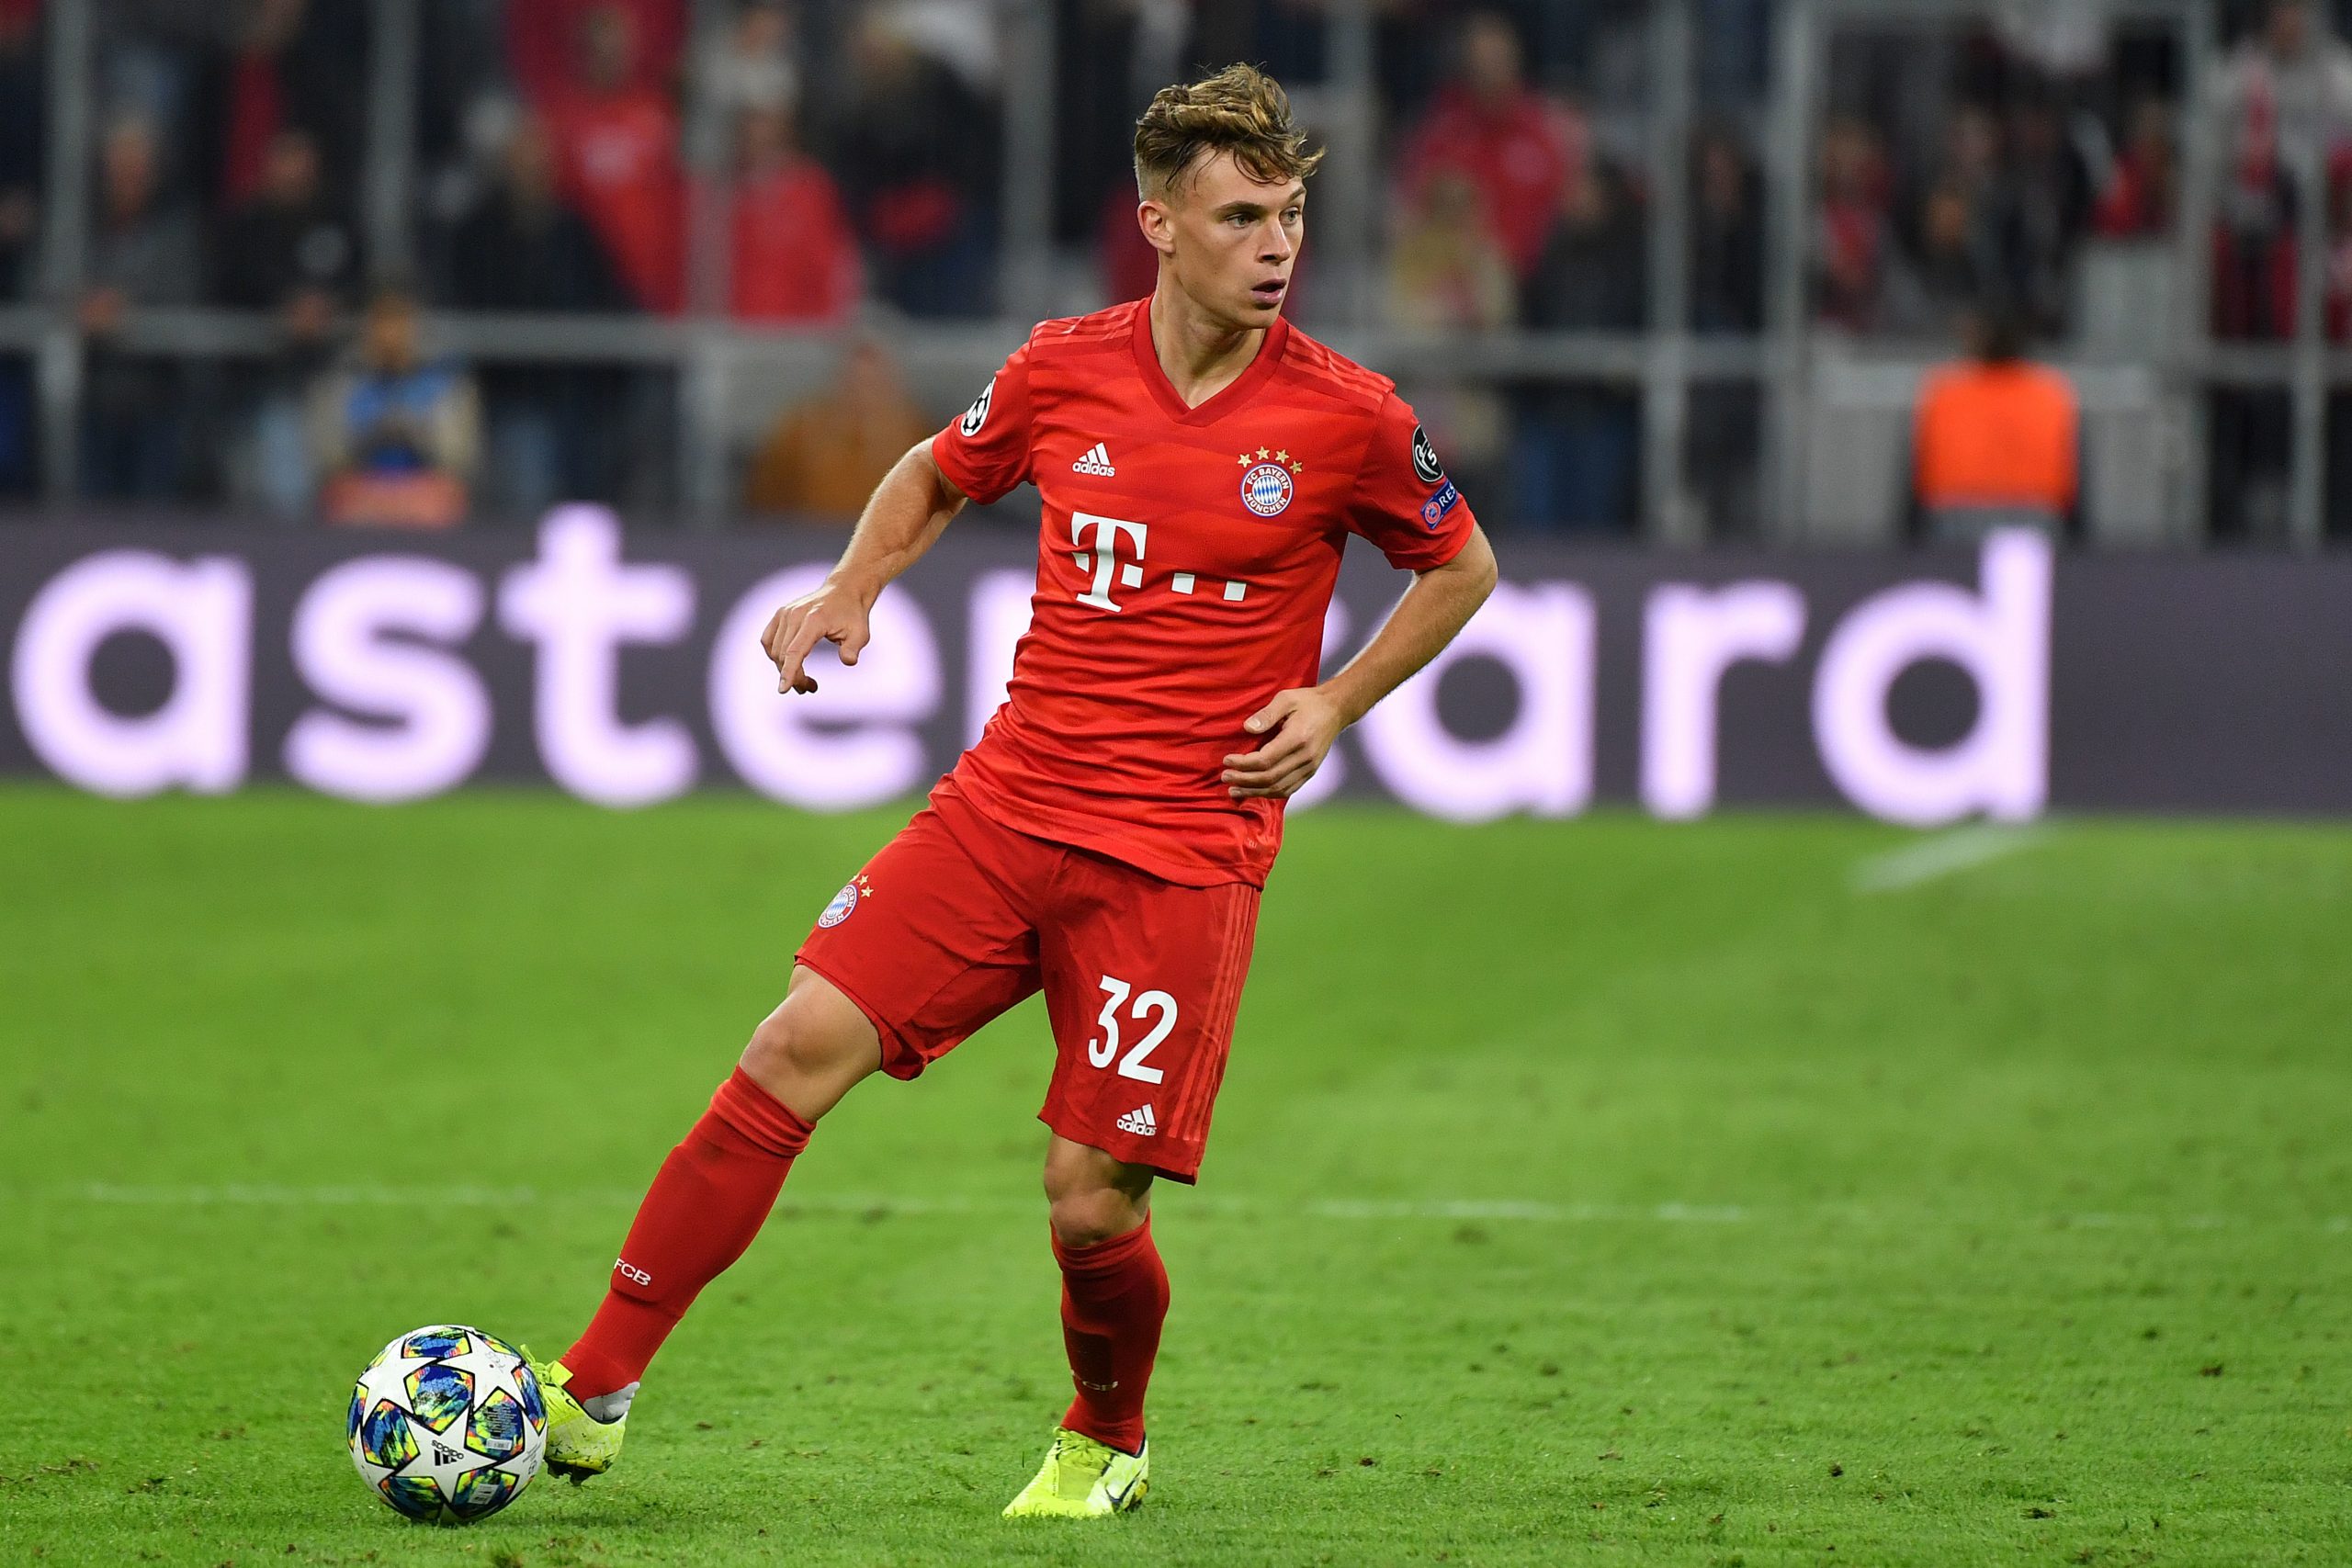 Joshua Kimmich is the key to Bayern’s revitalized midfield